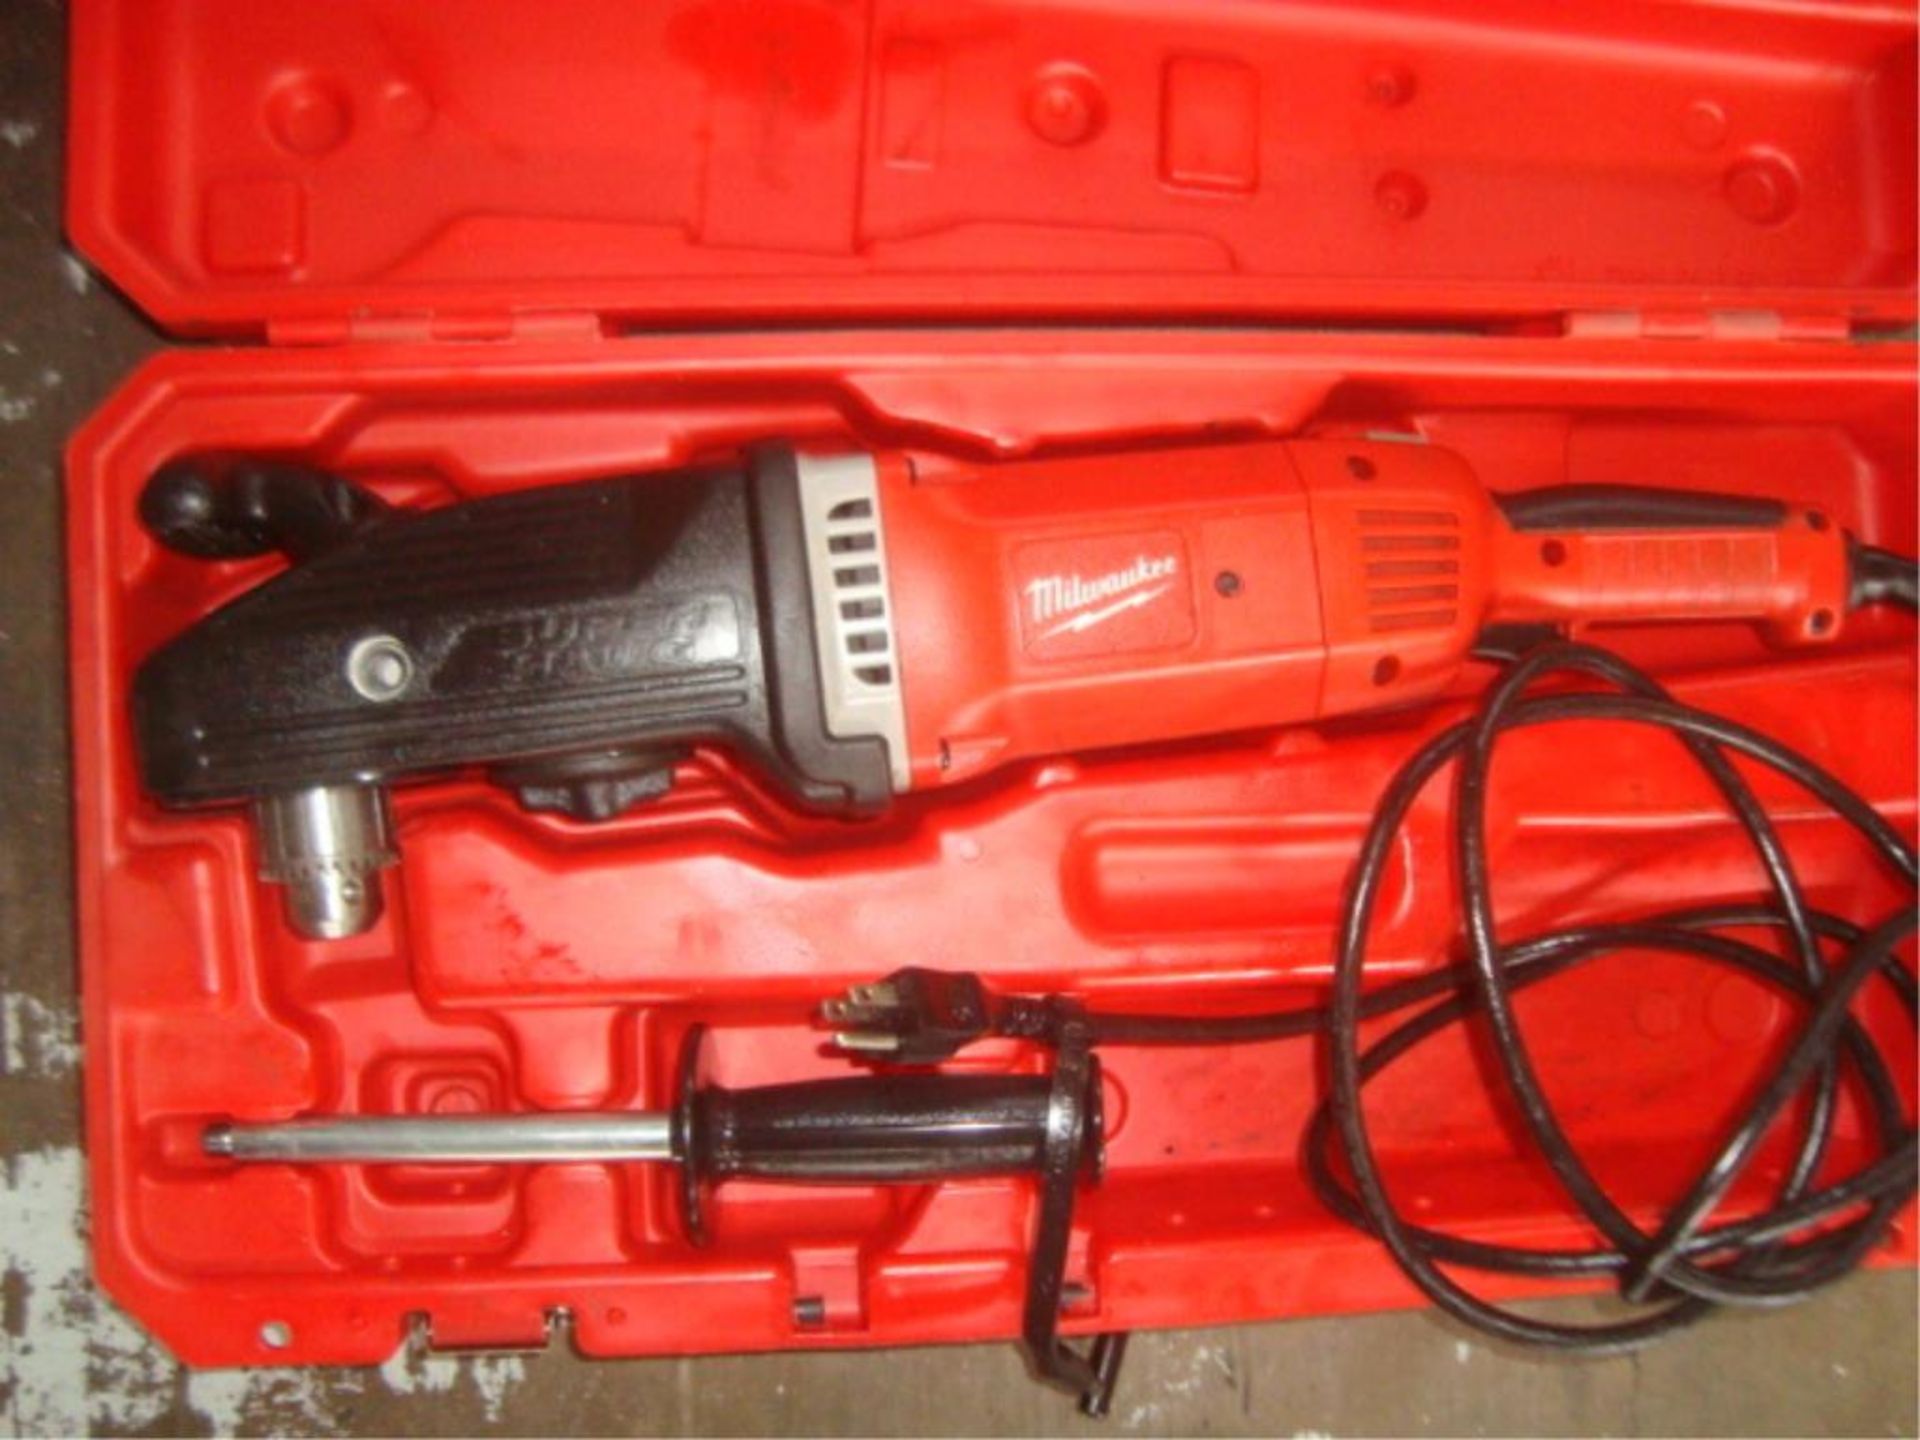 Super Hawg Electric Angle Drill - Image 4 of 9